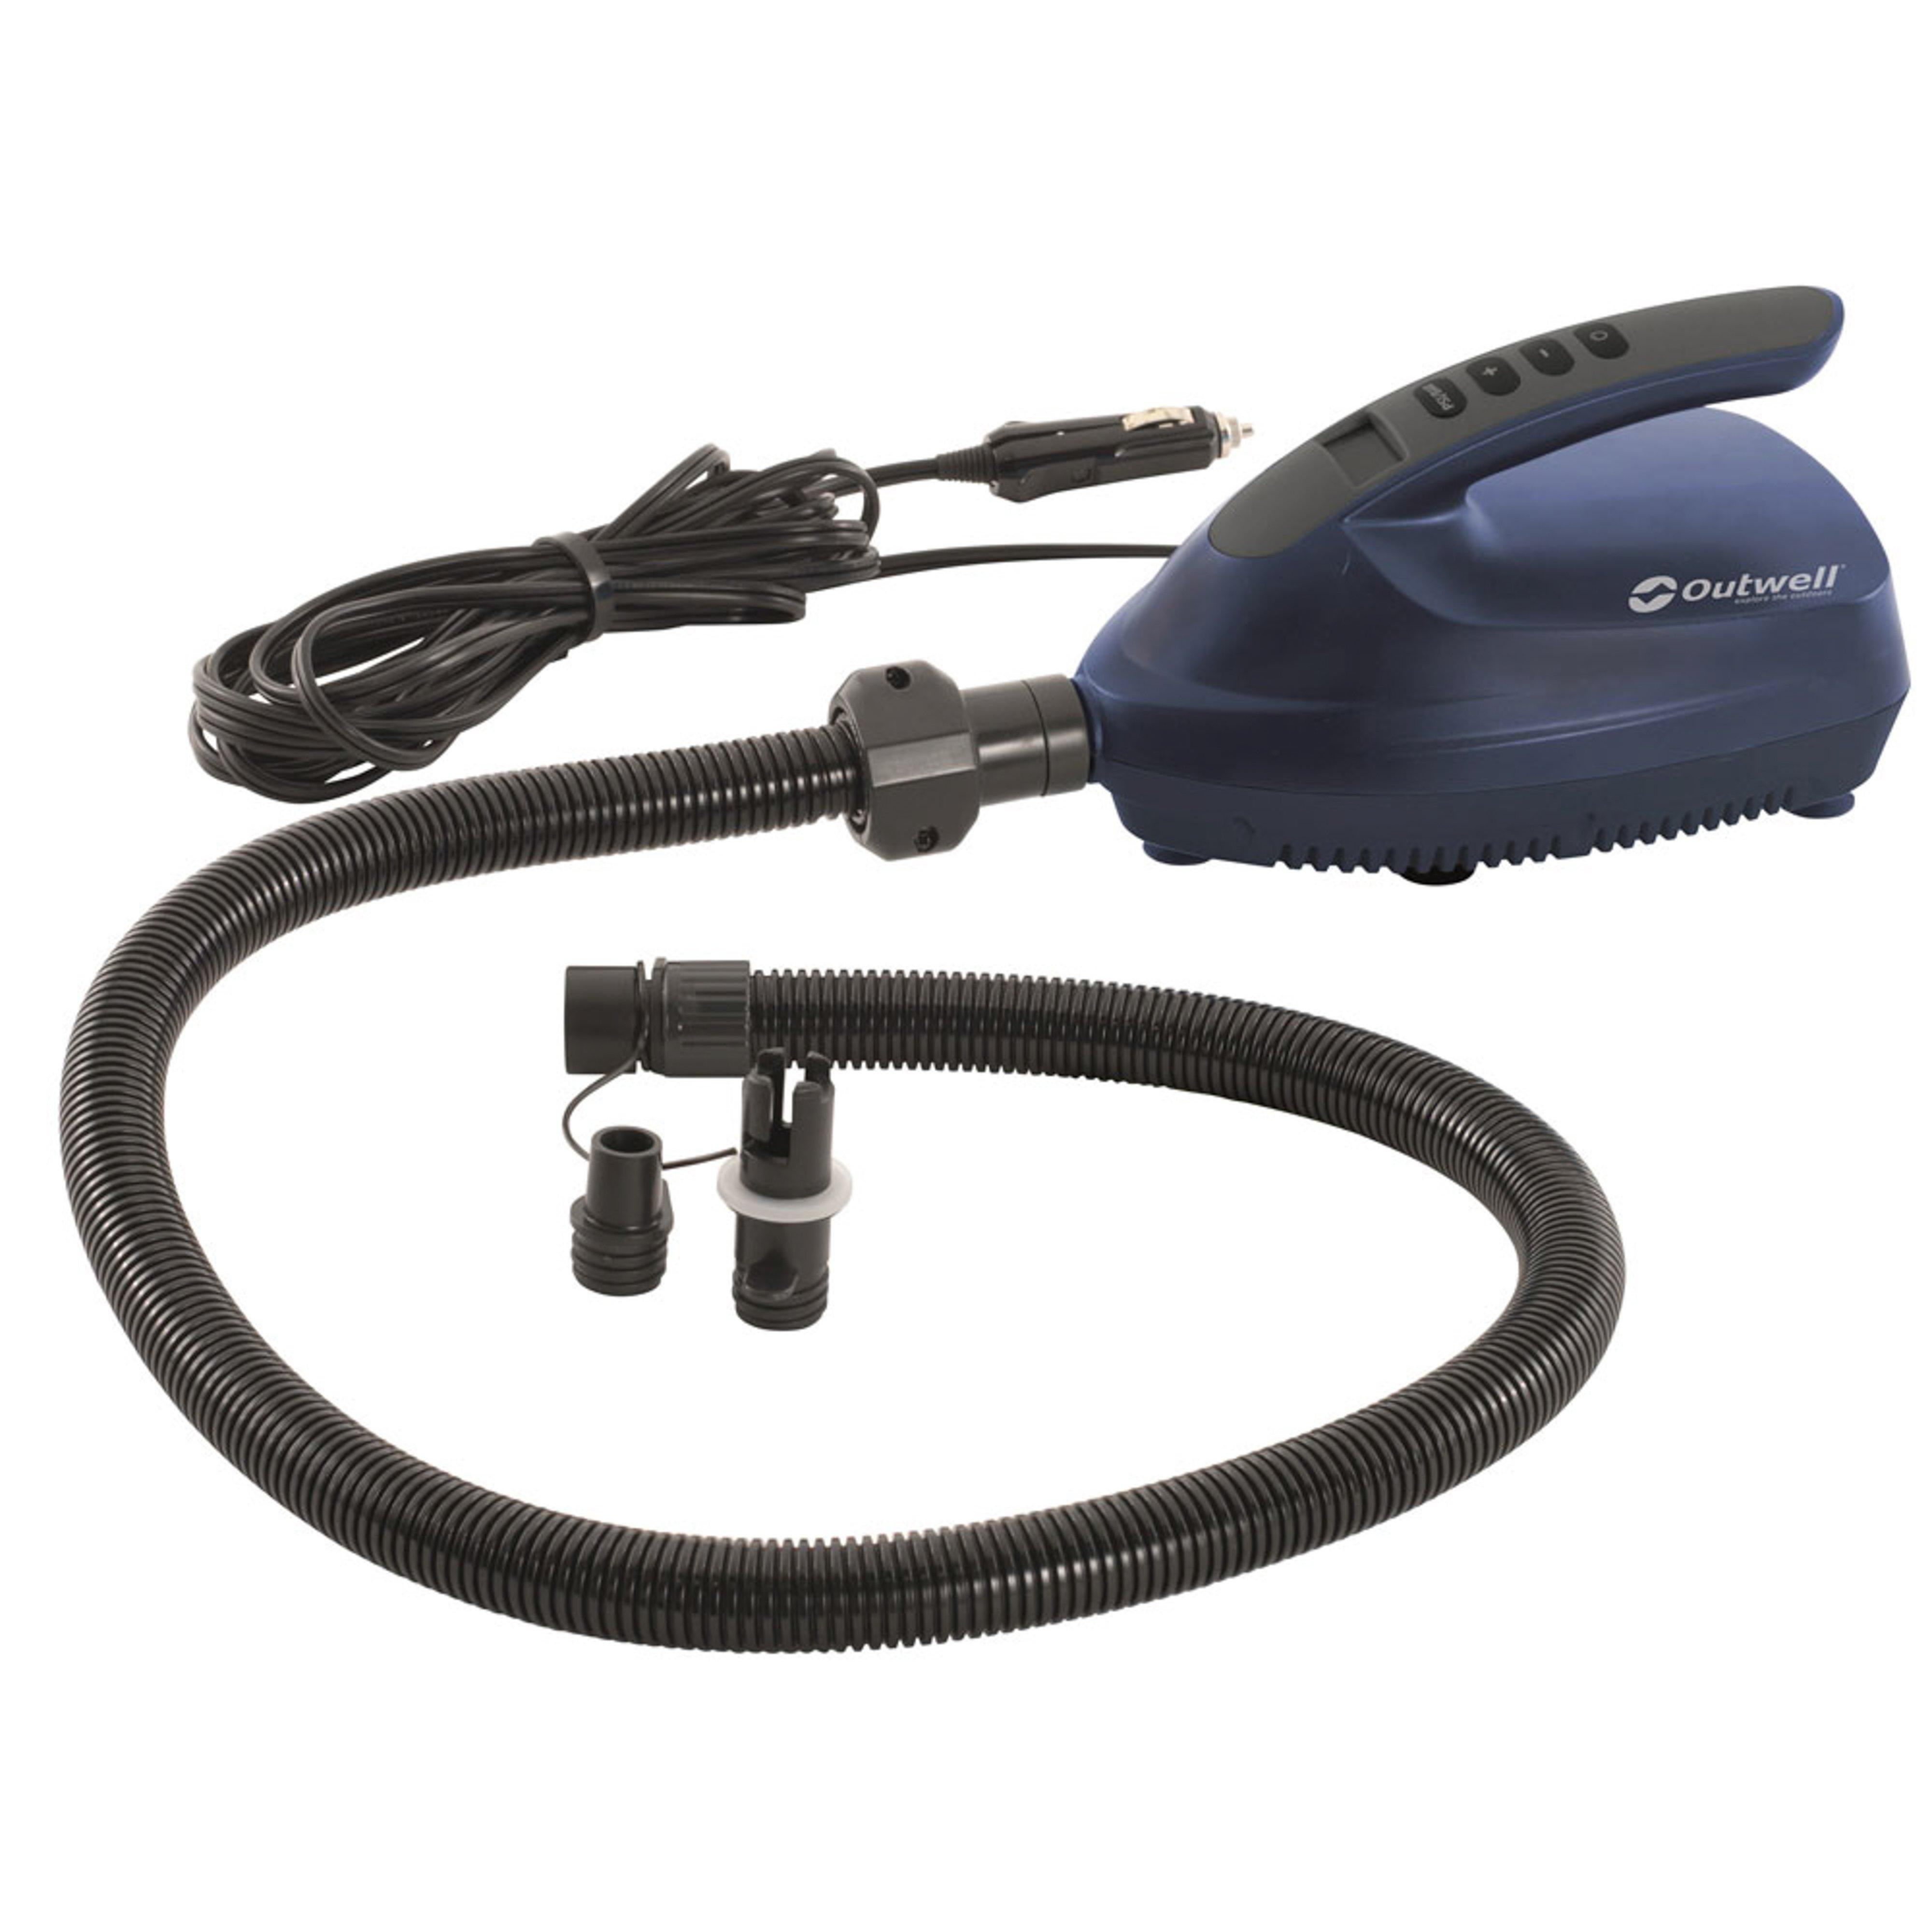 Outwell Squall Tent Pump 12V Review